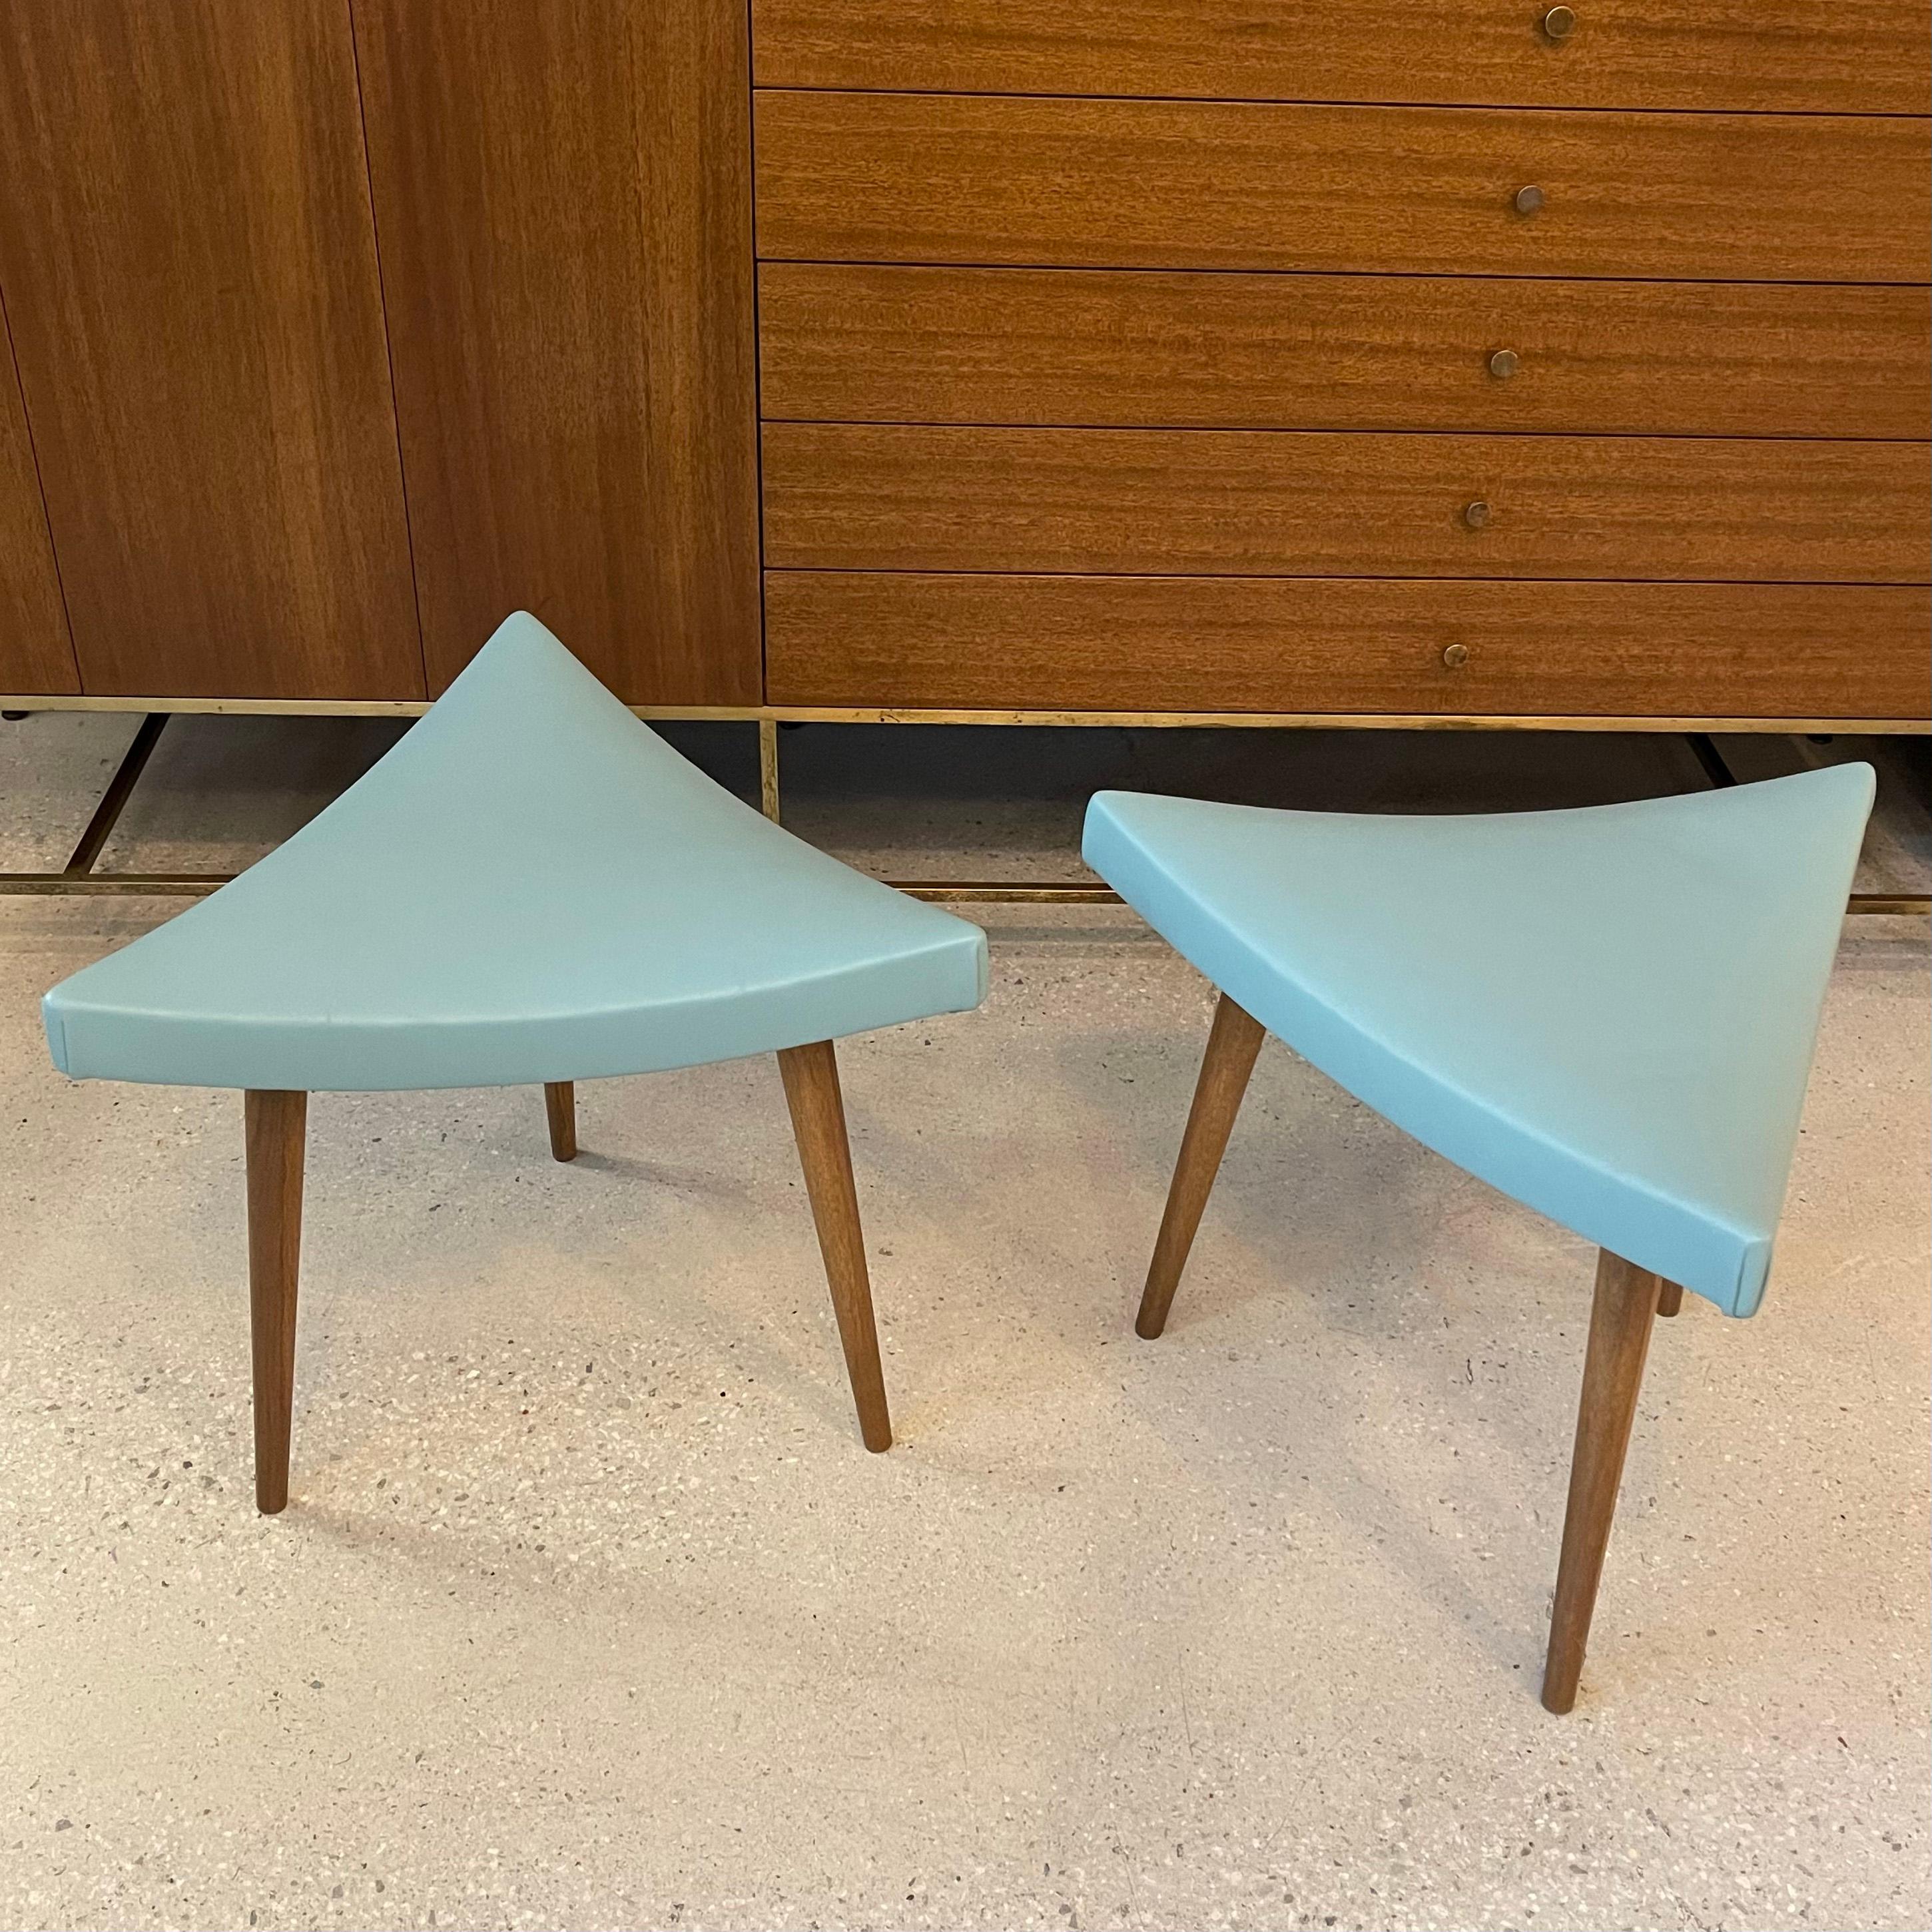 Leather cFsignature Mid-Century Modern Style Triangular Stools For Sale